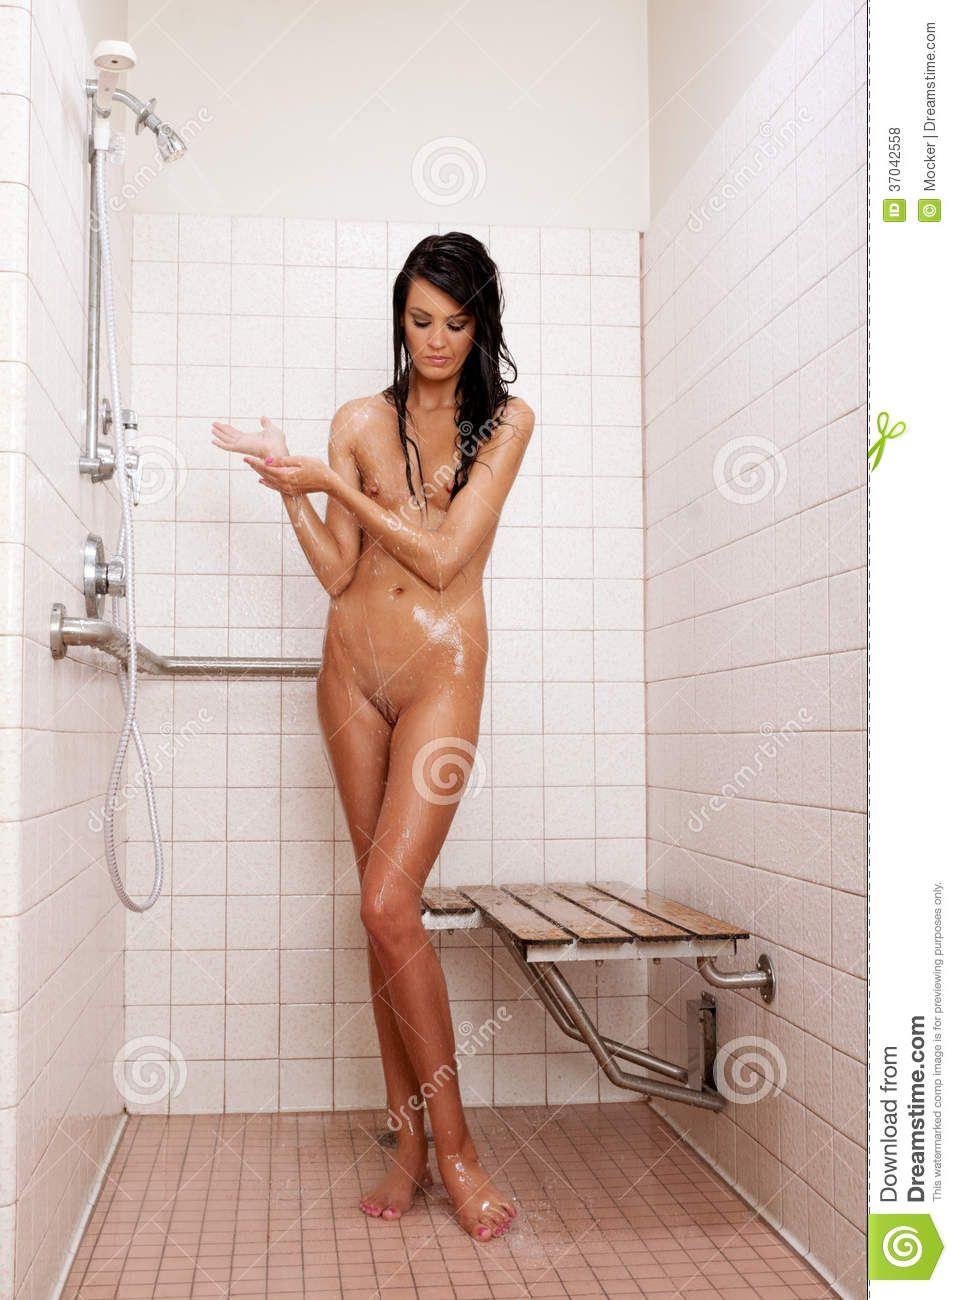 best of Shower Free nude woman